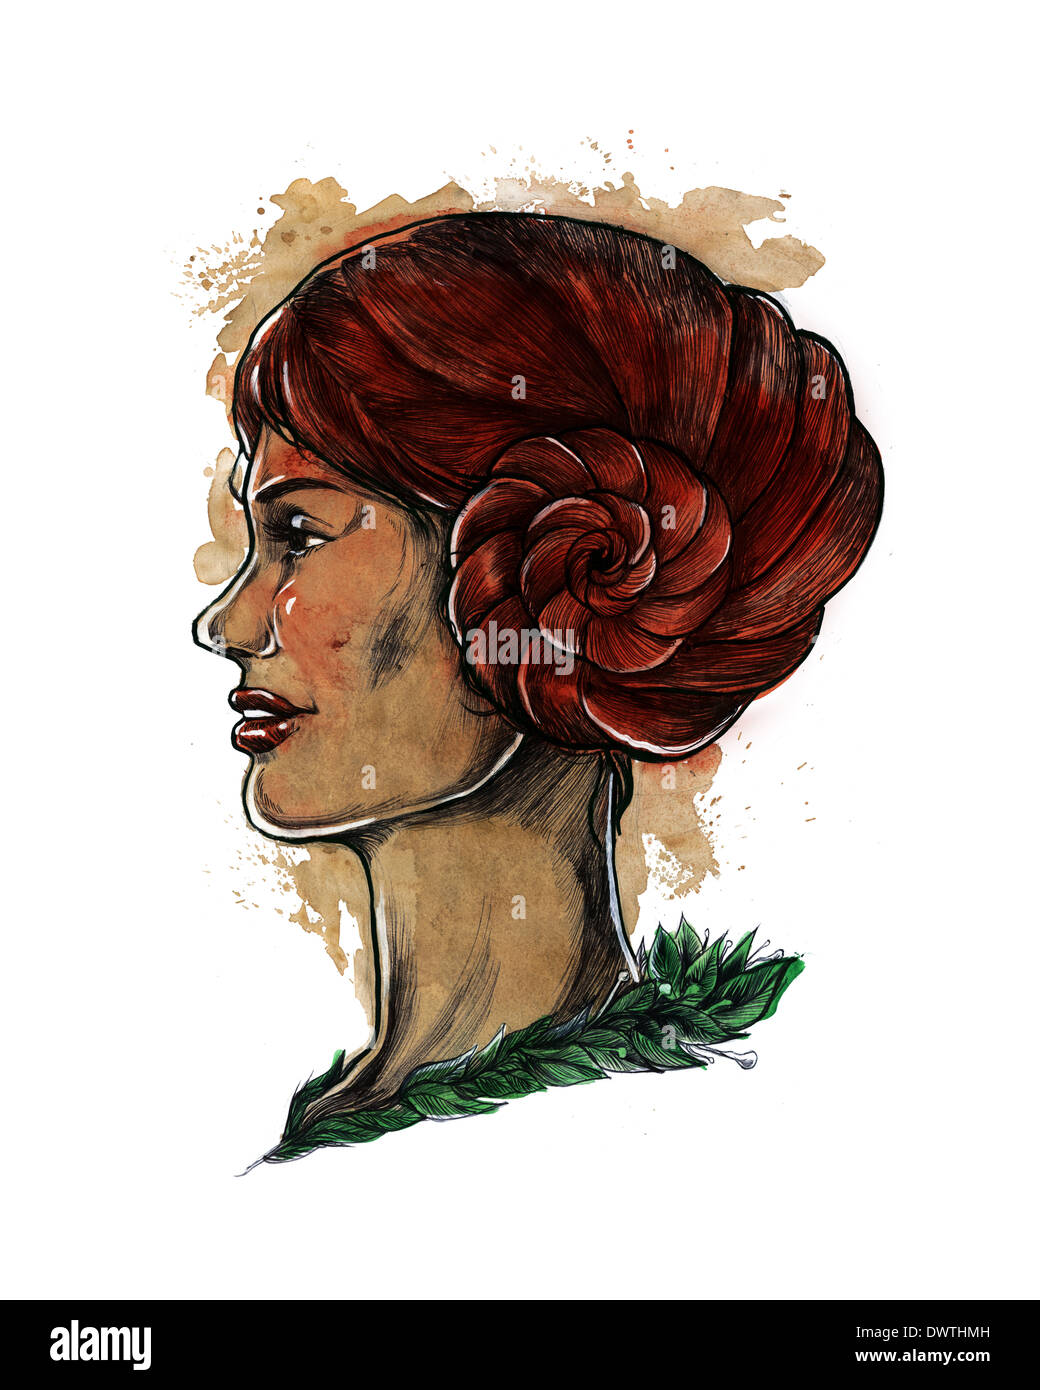 Illustration of woman with hair in spiral horned shape representing Aries zodiac sign Stock Photo